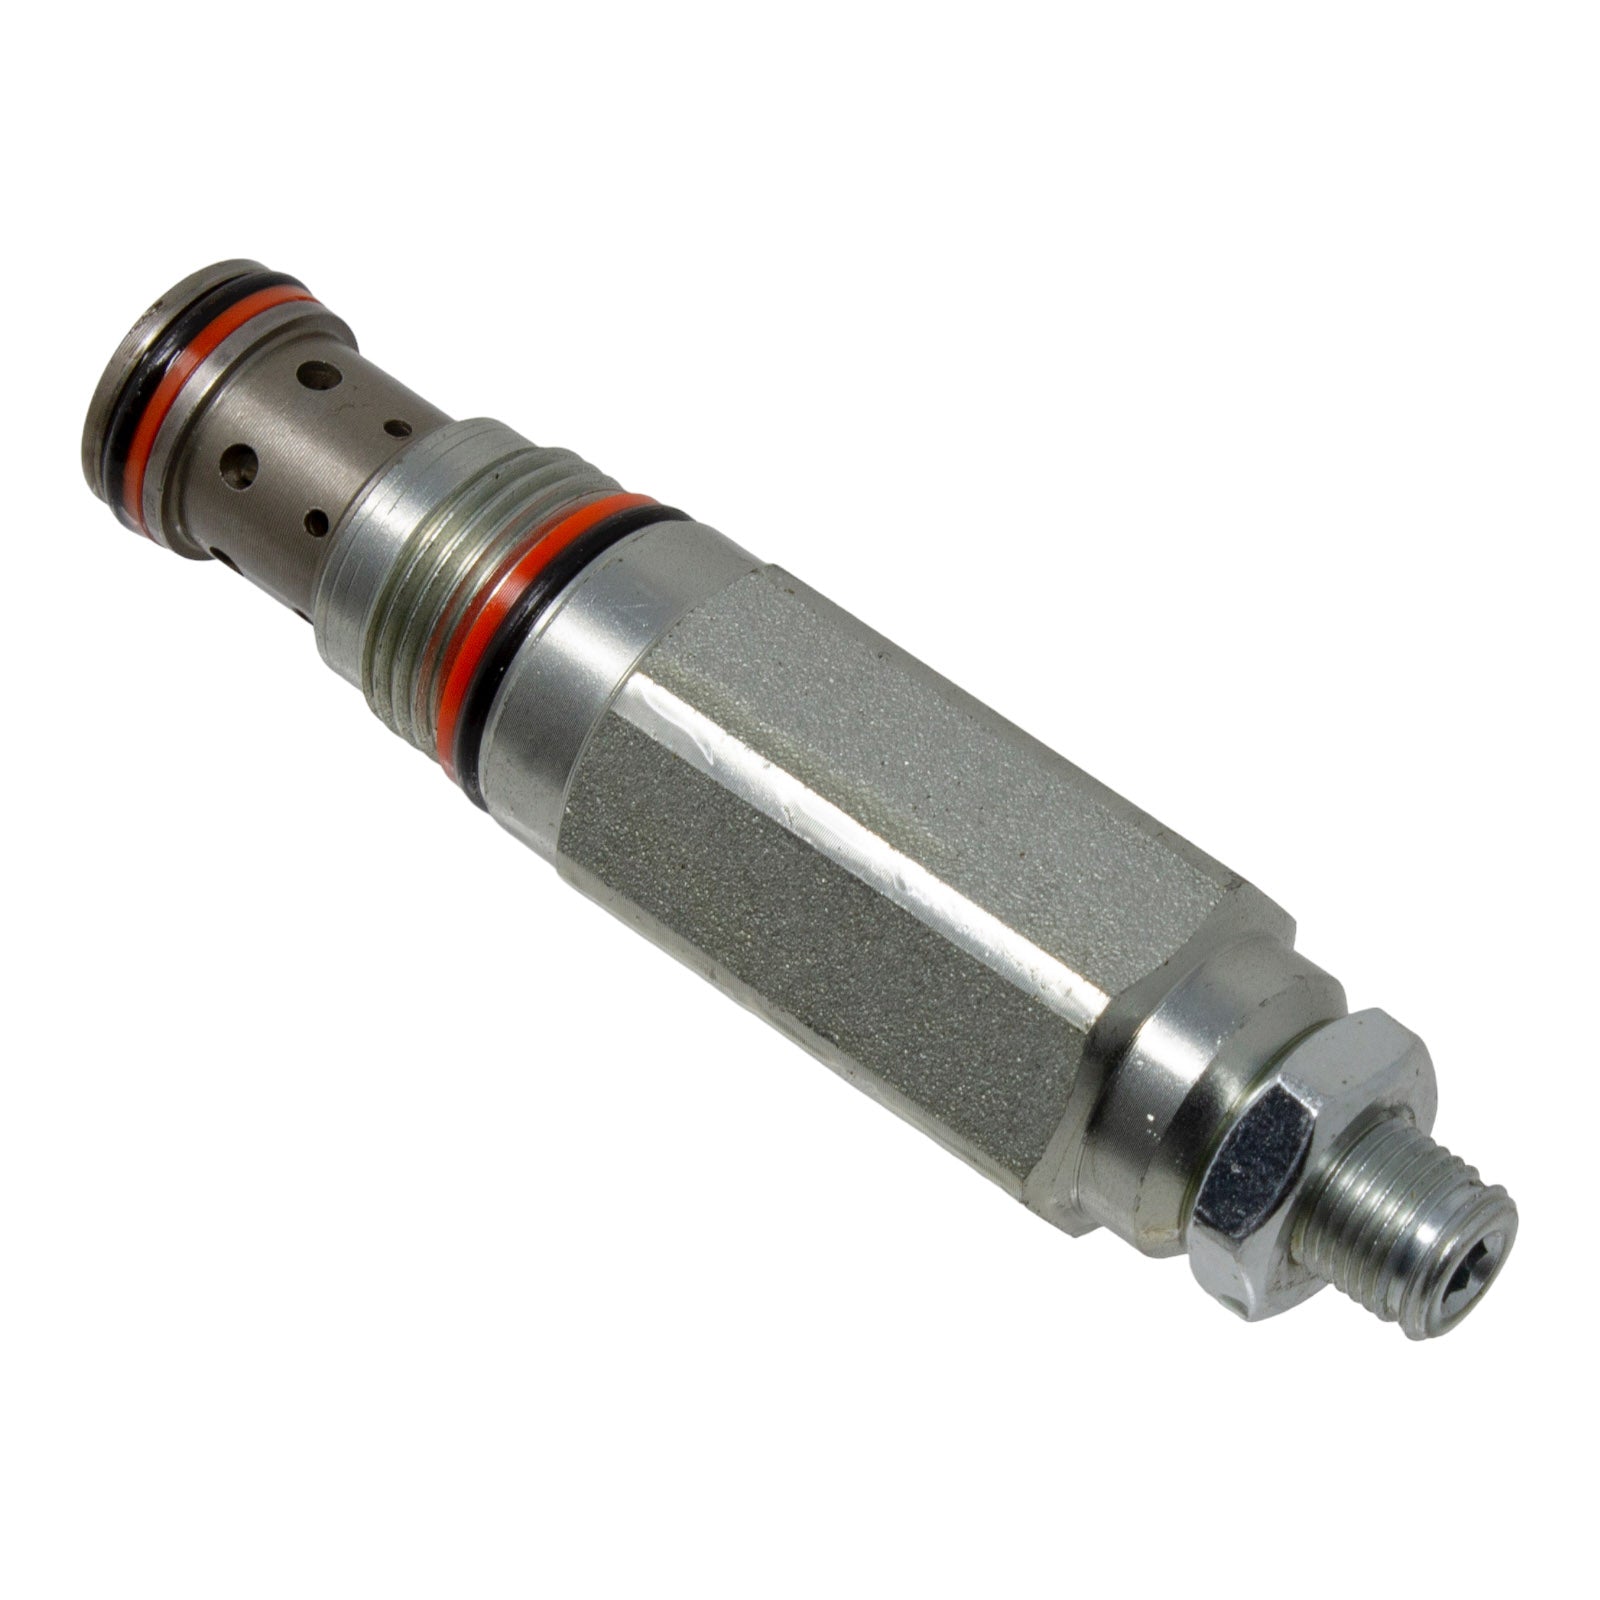 6686360, Hydraulic Pressure Relief Valve For Bobcat at Duraforce